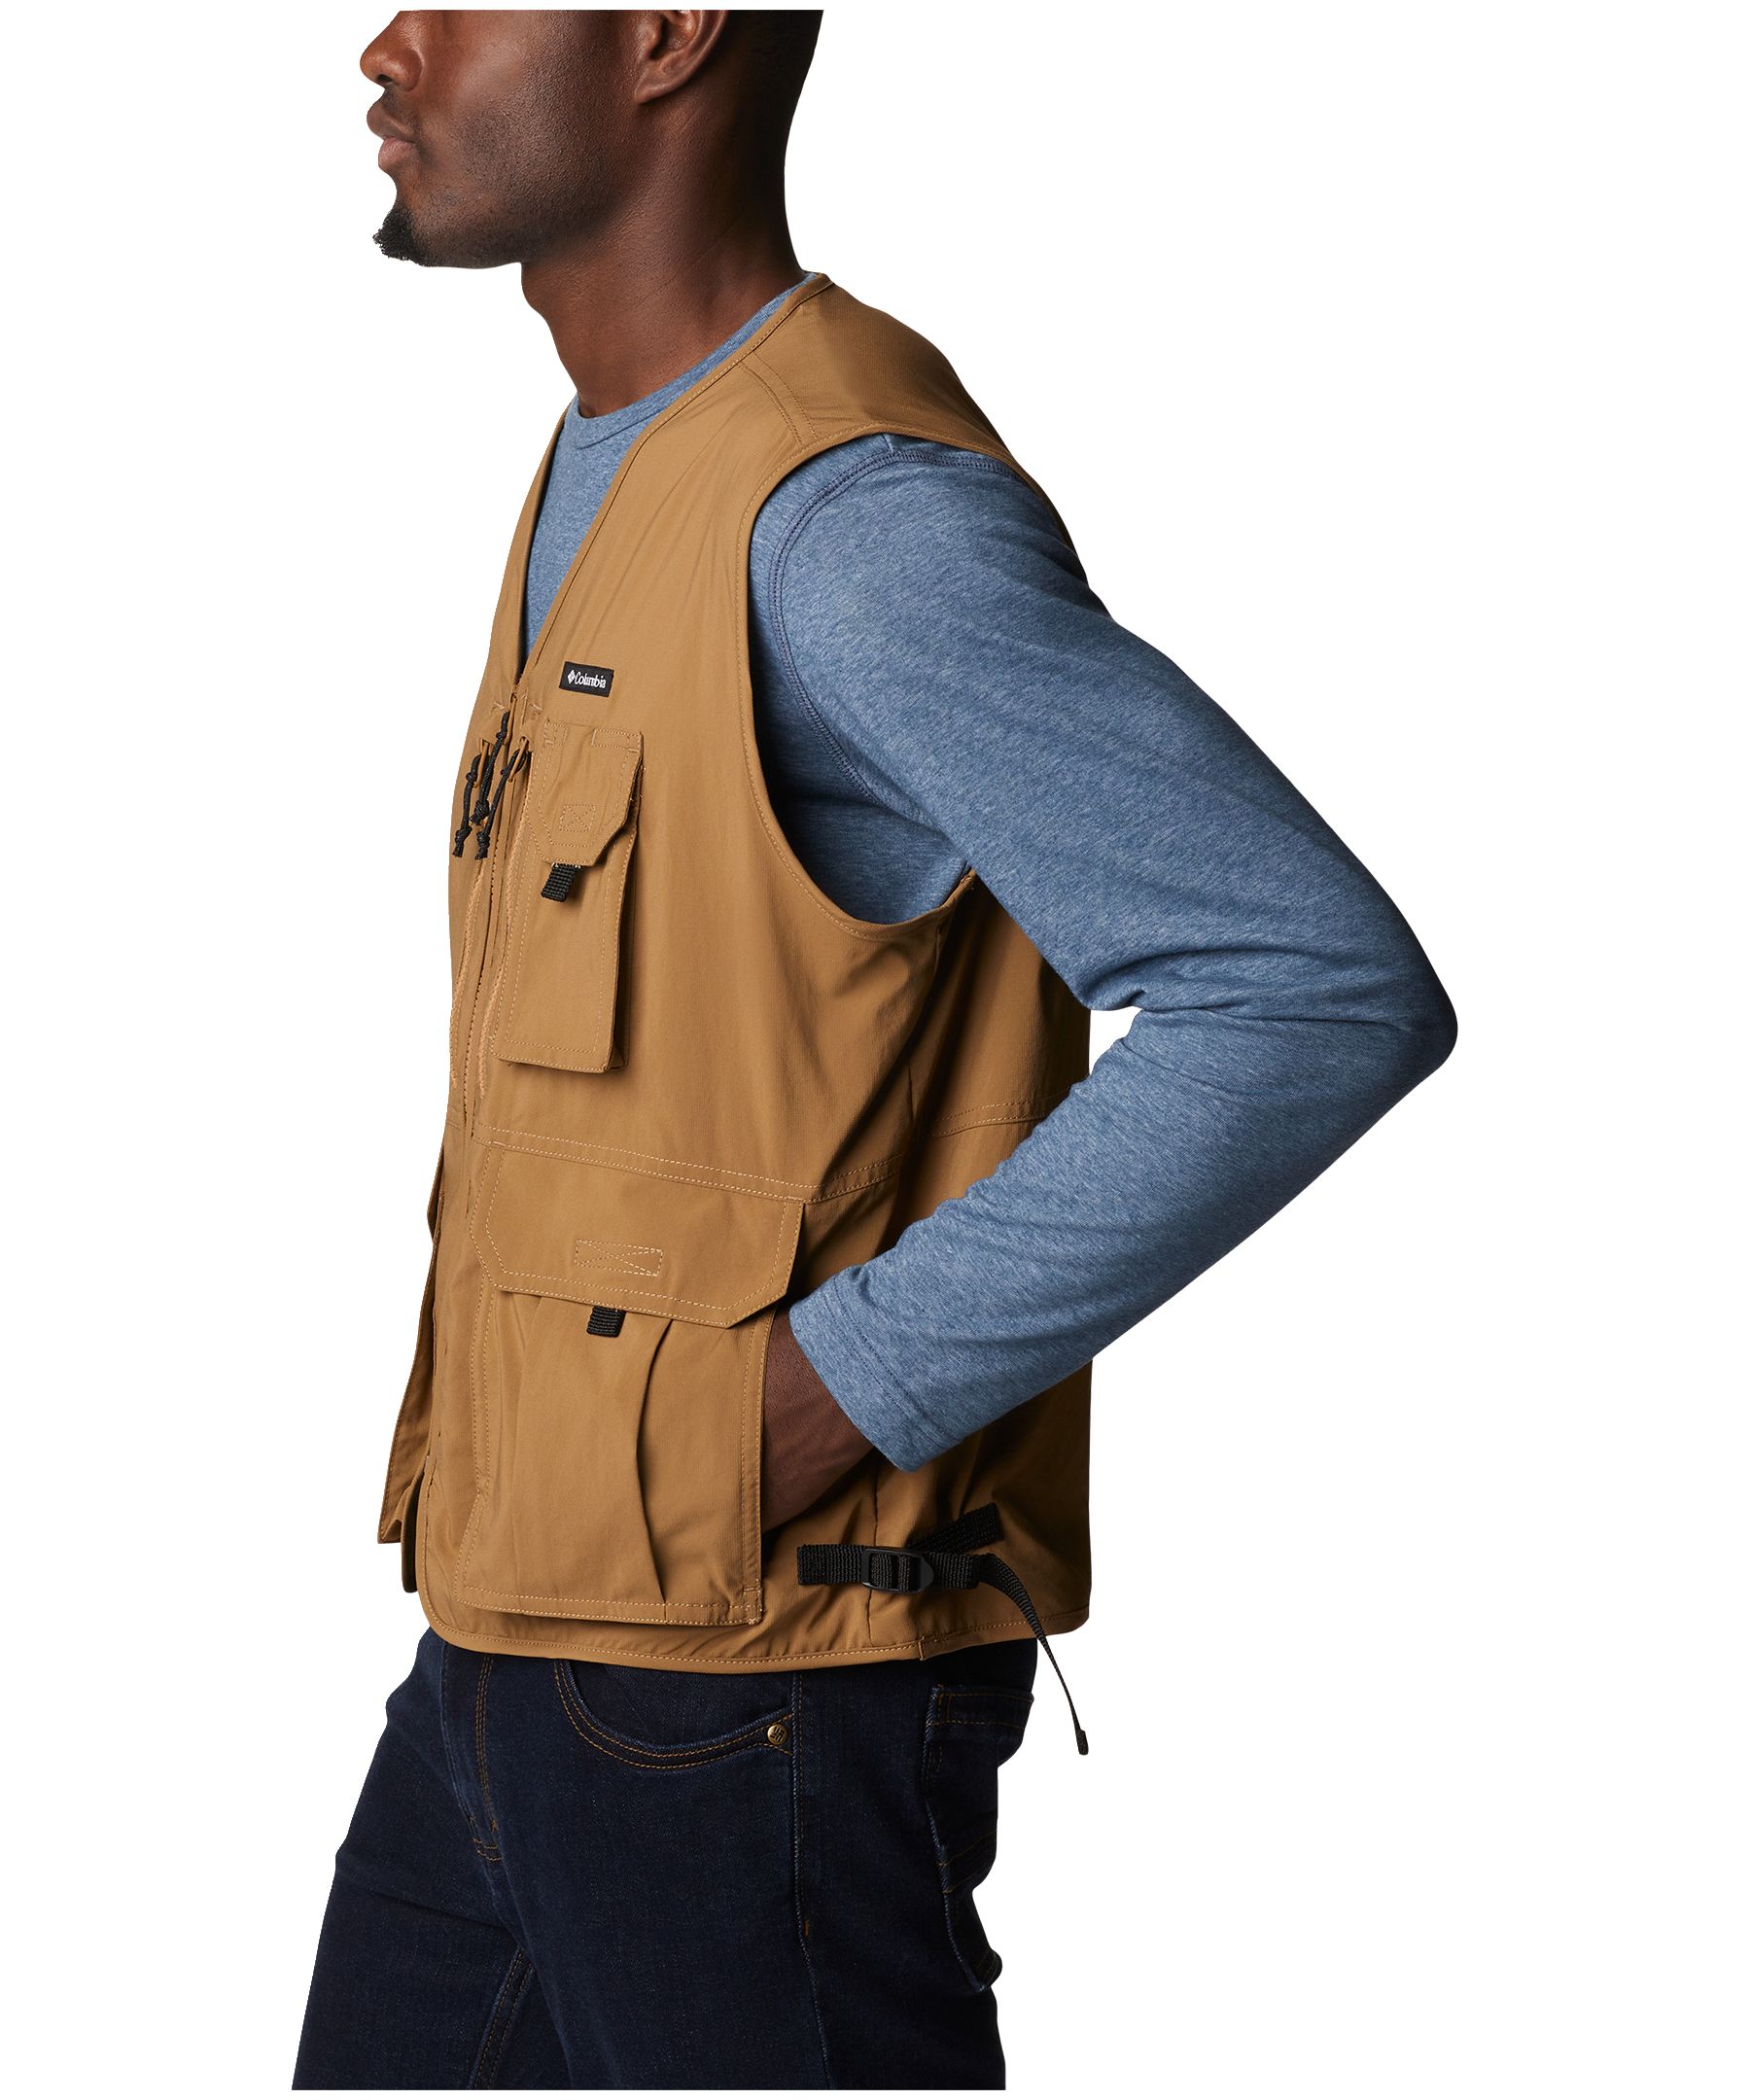 https://media-www.marks.com/product/marks-work-wearhouse/mens-world/mens-woven/410036976161/columbia-men-s-silver-ridge-omni-shade-utility-vest-5cf18244-76d4-4eaa-bc41-93702201c54f-jpgrendition.jpg?imdensity=1&imwidth=1244&impolicy=mZoom